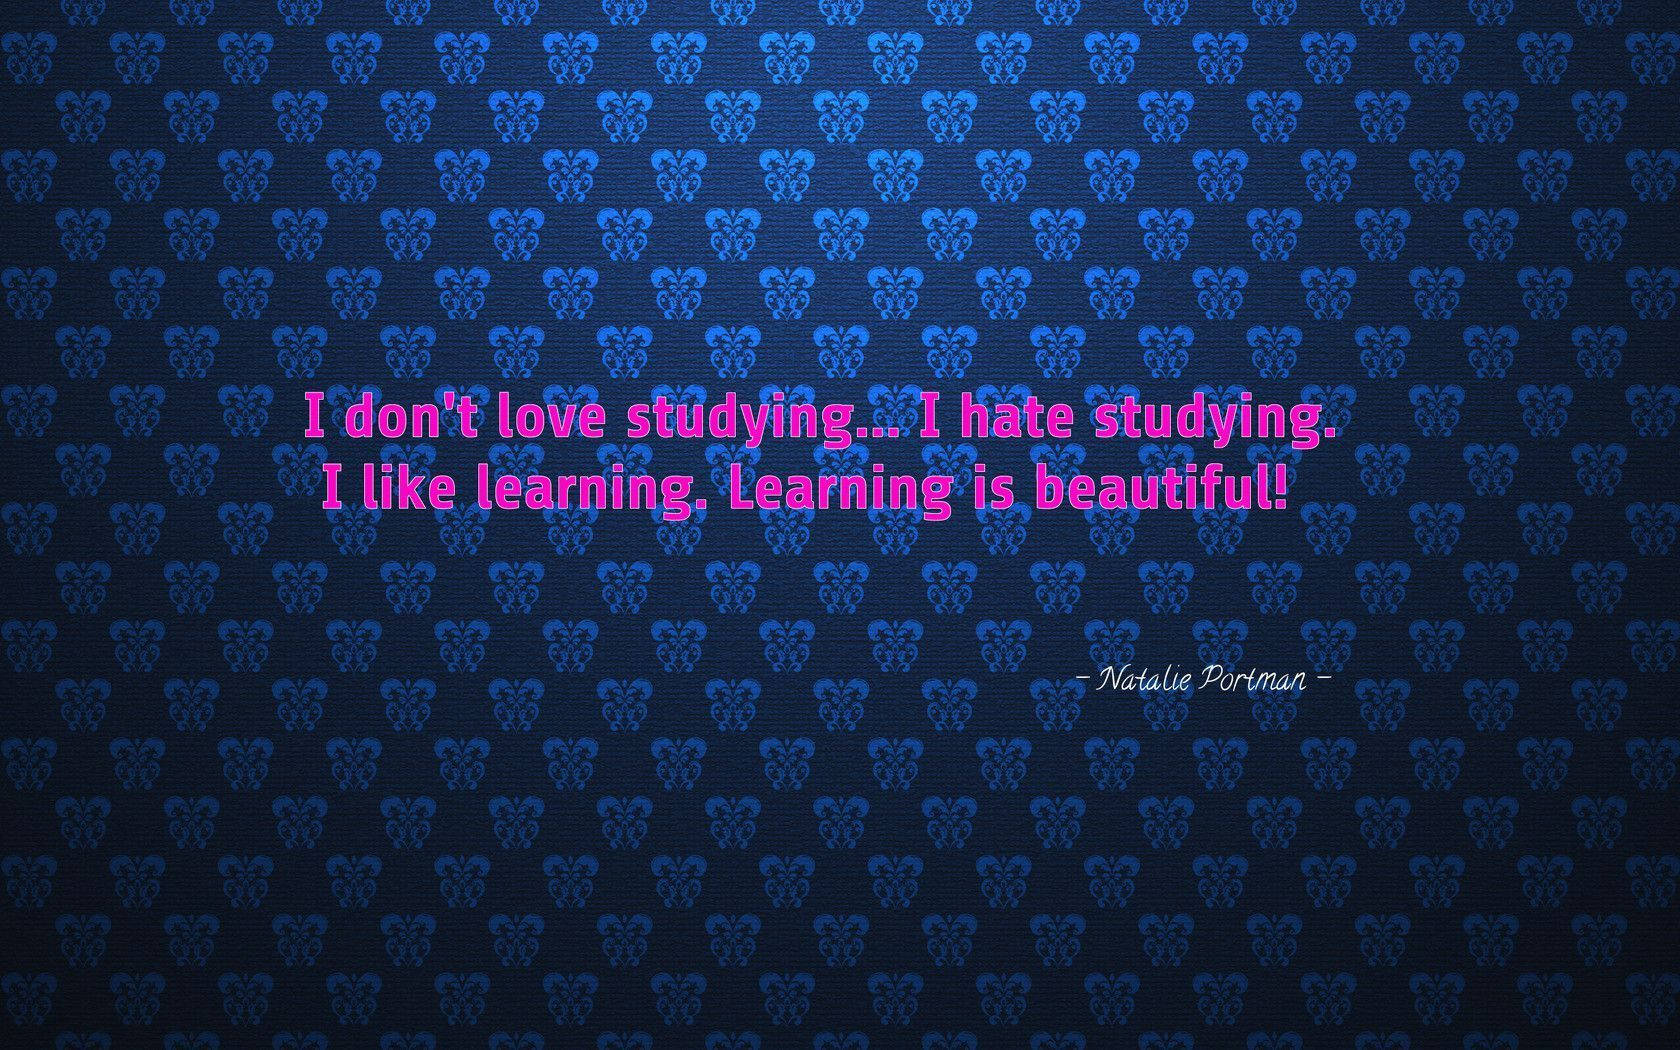 Studying And Learning Wallpaper